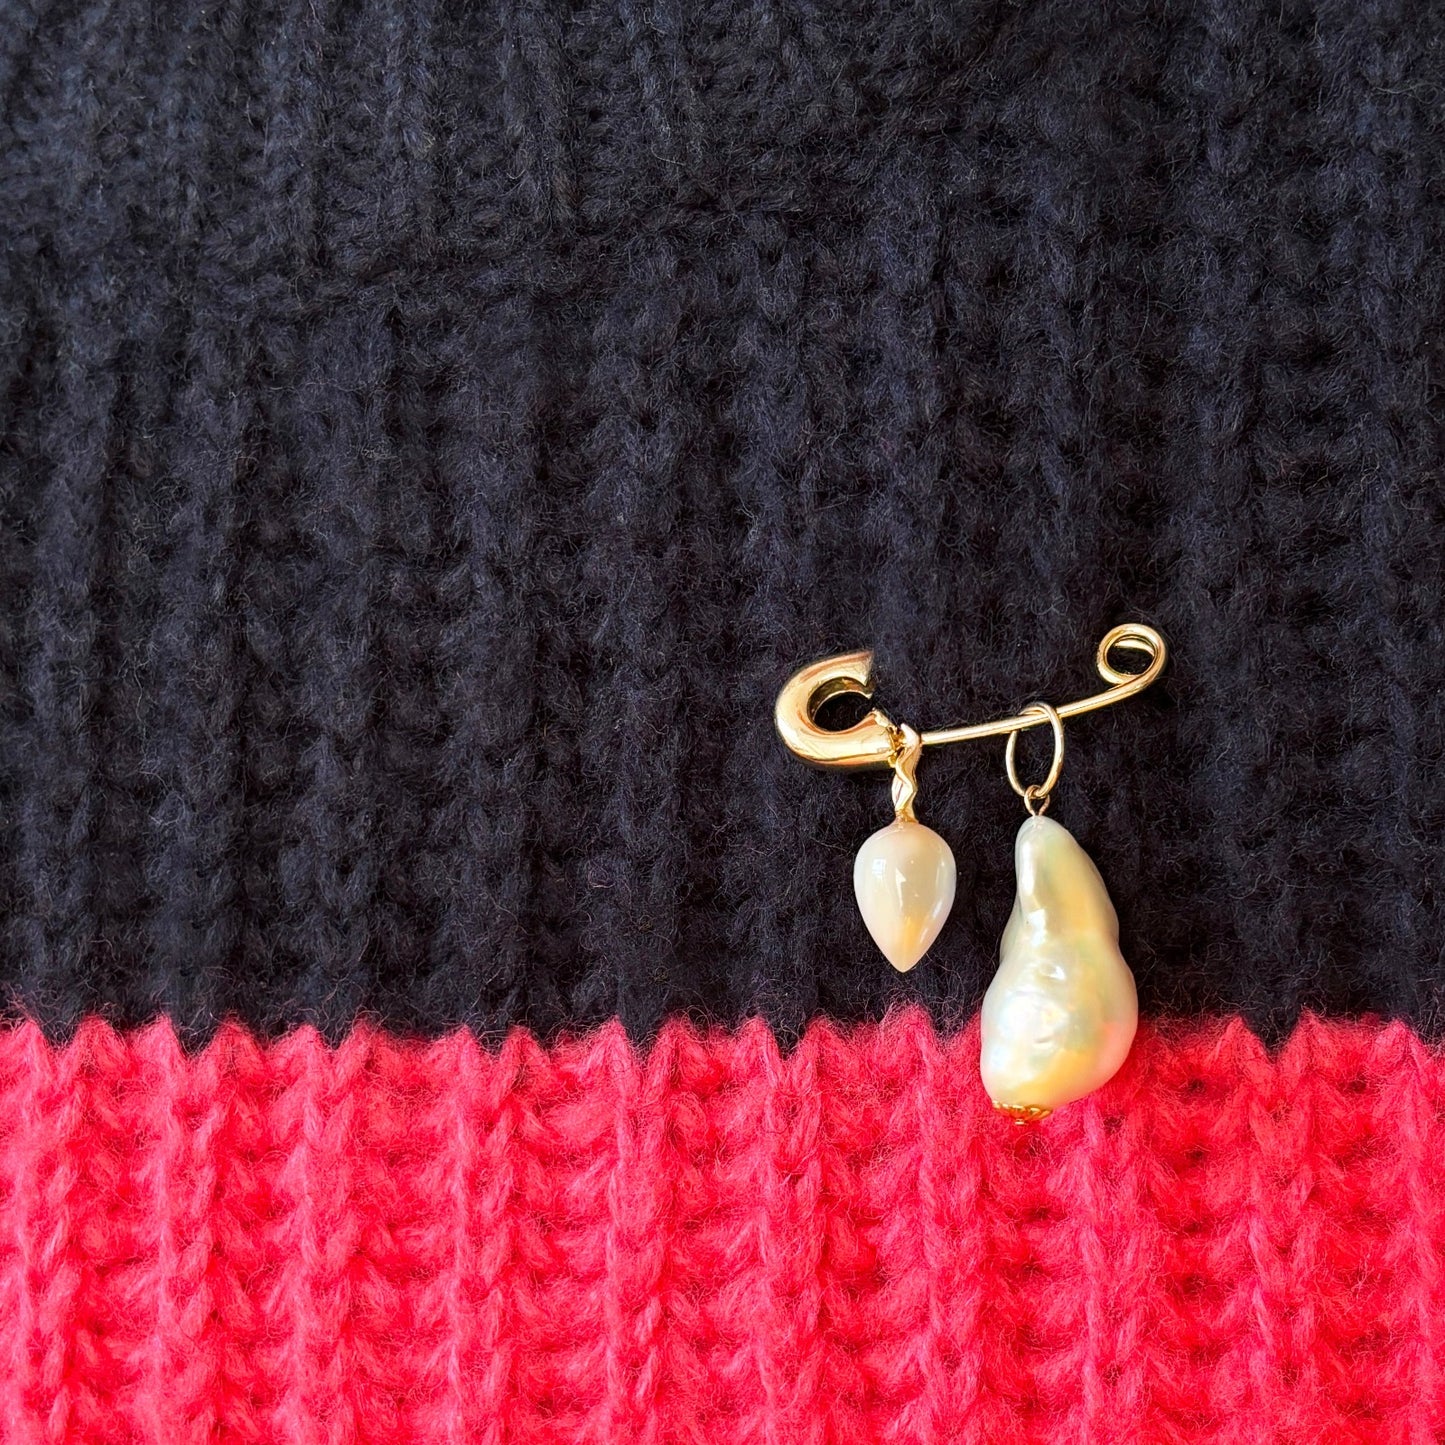 14k yellow gold safety pin charm lock. Styled on a sweater with an acorn drop charm and baroque pearl charm.